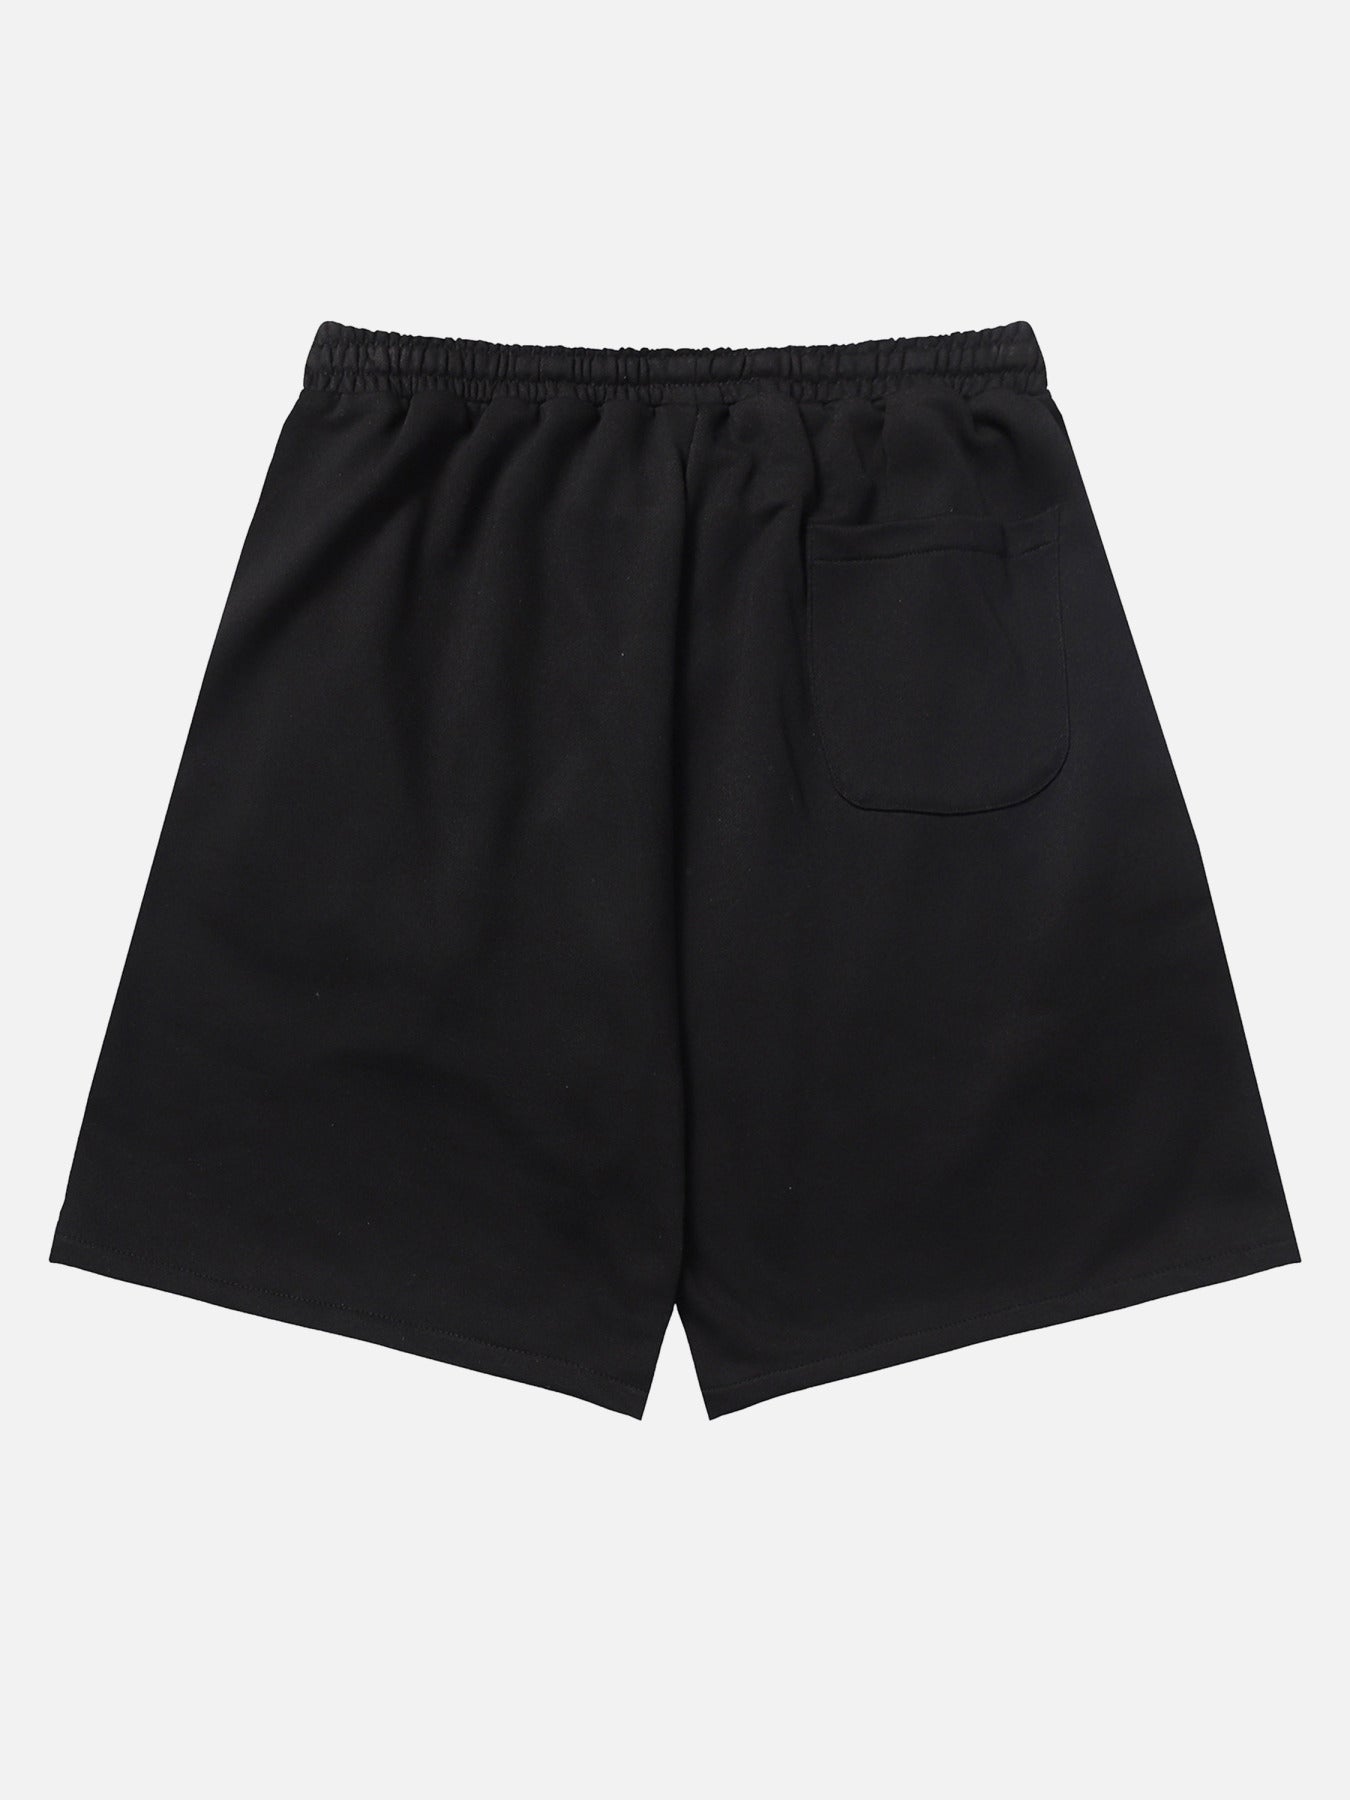 The Supermade High Street Star Shorts